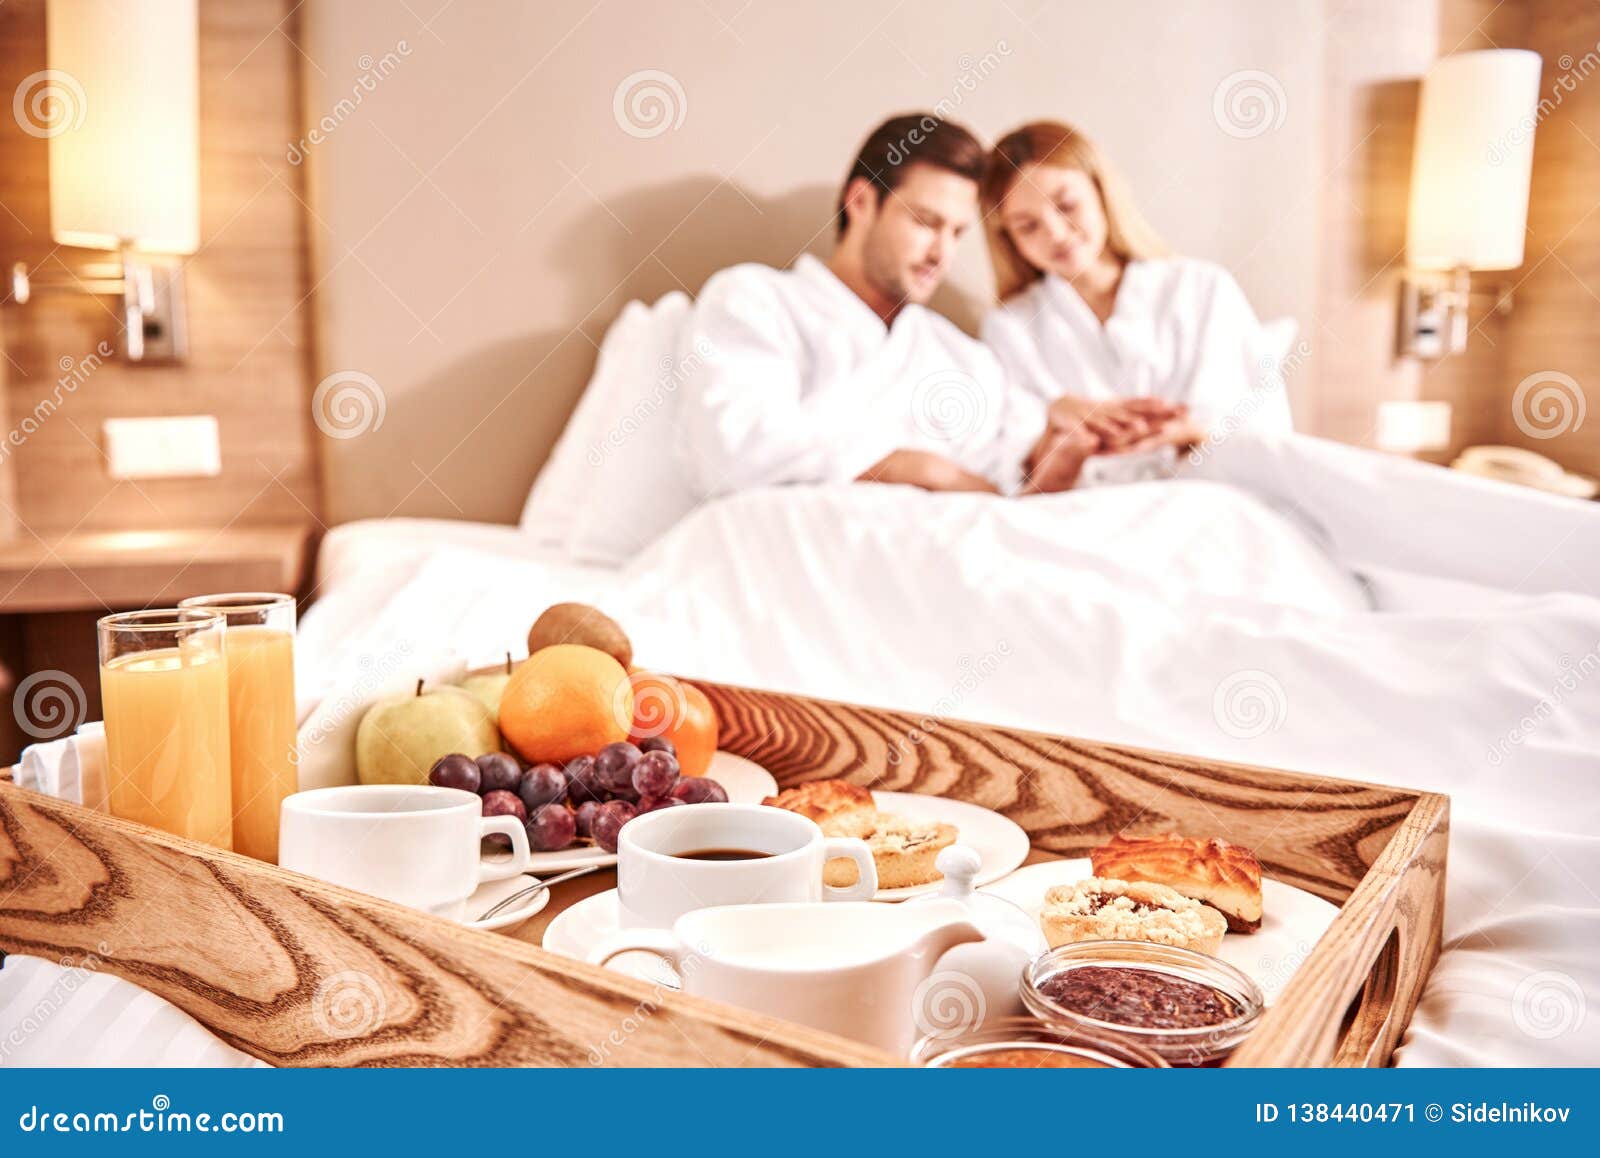 Food In A Bed Couple Are Hugging In Hotel Room Bed Stock Image Imag